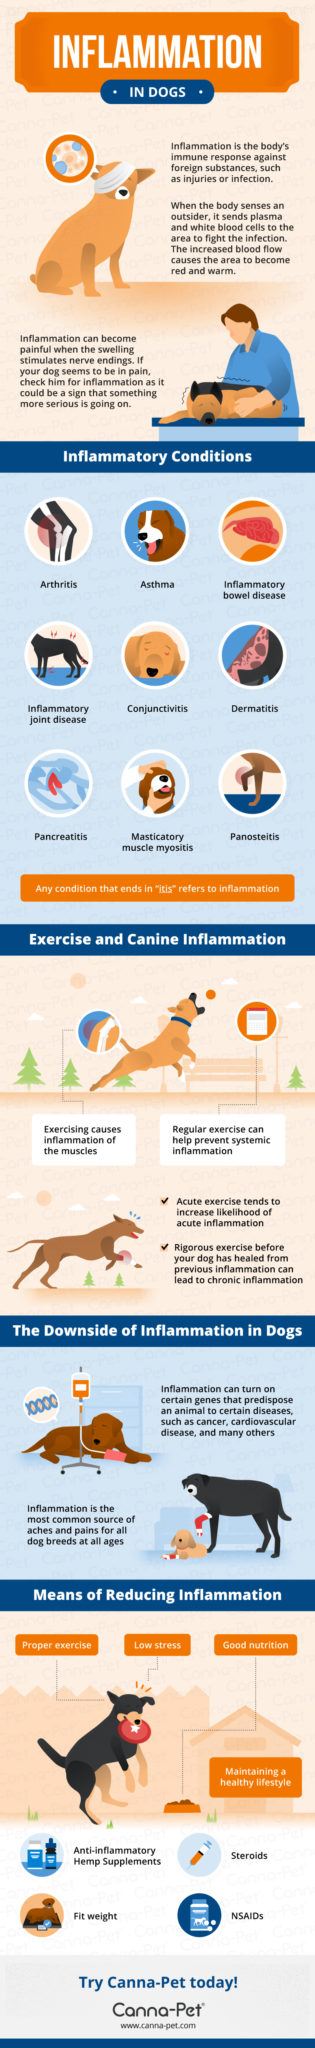 Inflammation in Dogs Infographic